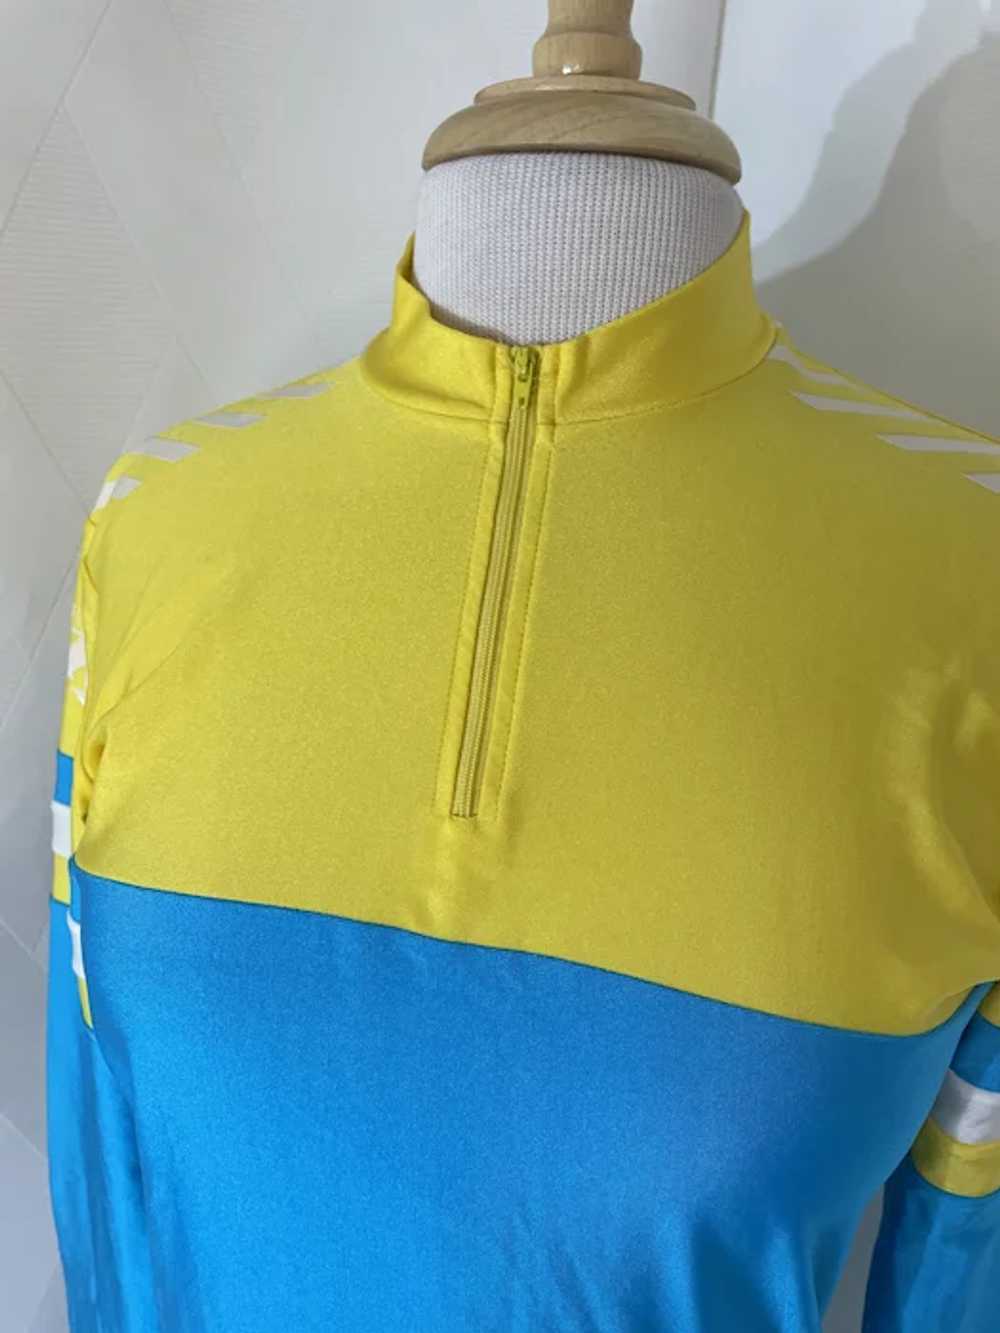 Vintage 1990s Descente Yellow and Blue Long Sleev… - image 4